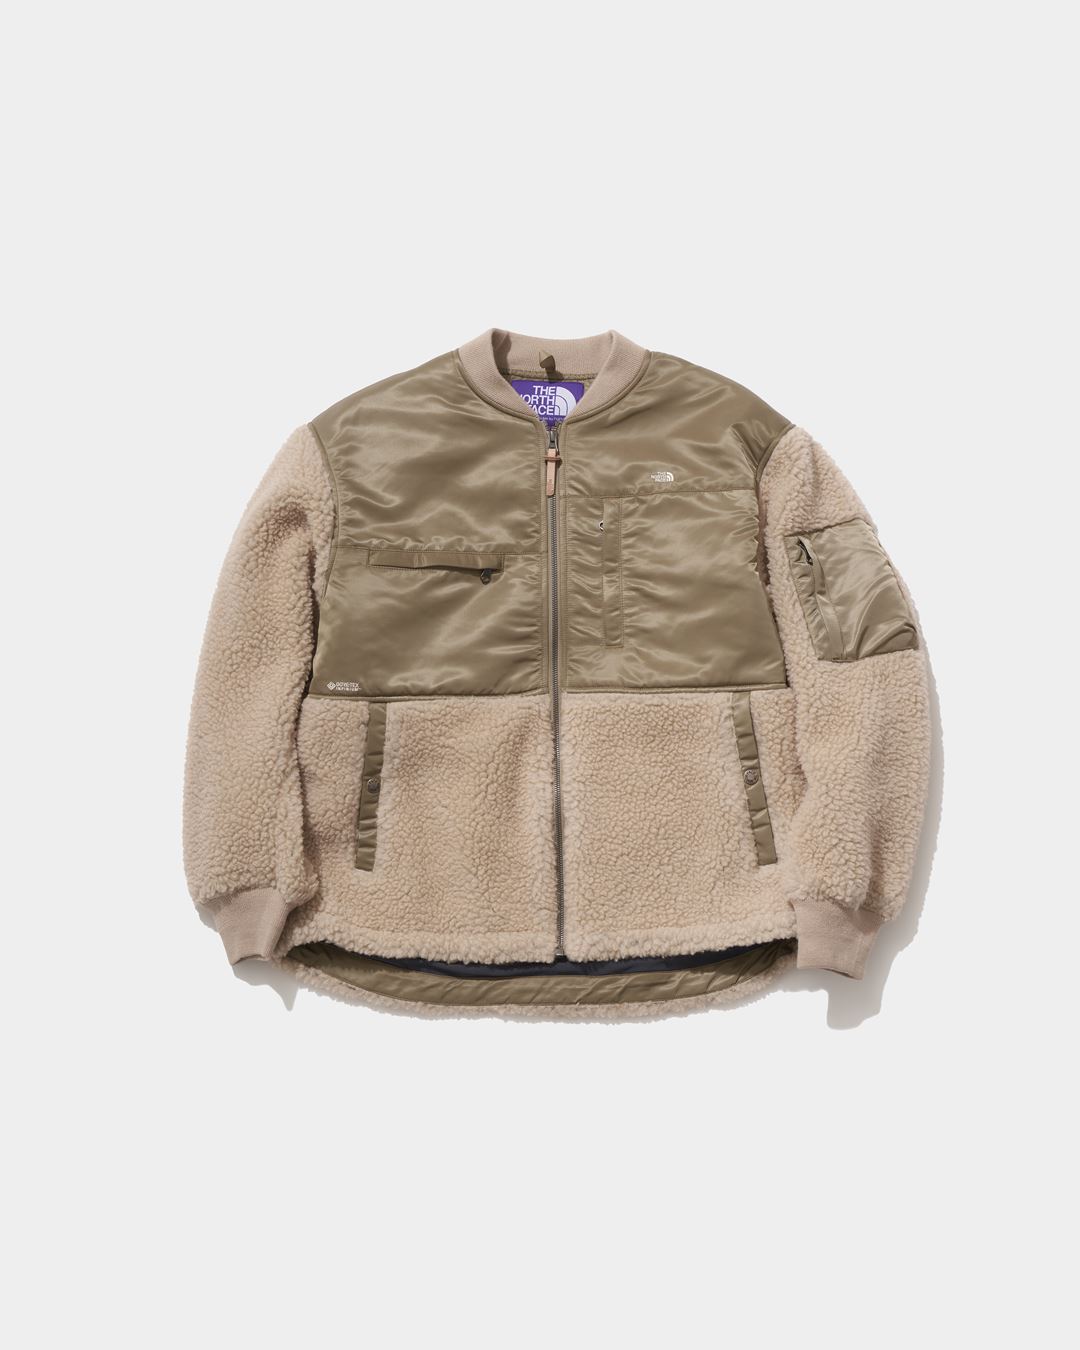 THE NORTH FACE PURPLE LABEL  デナリジャケット